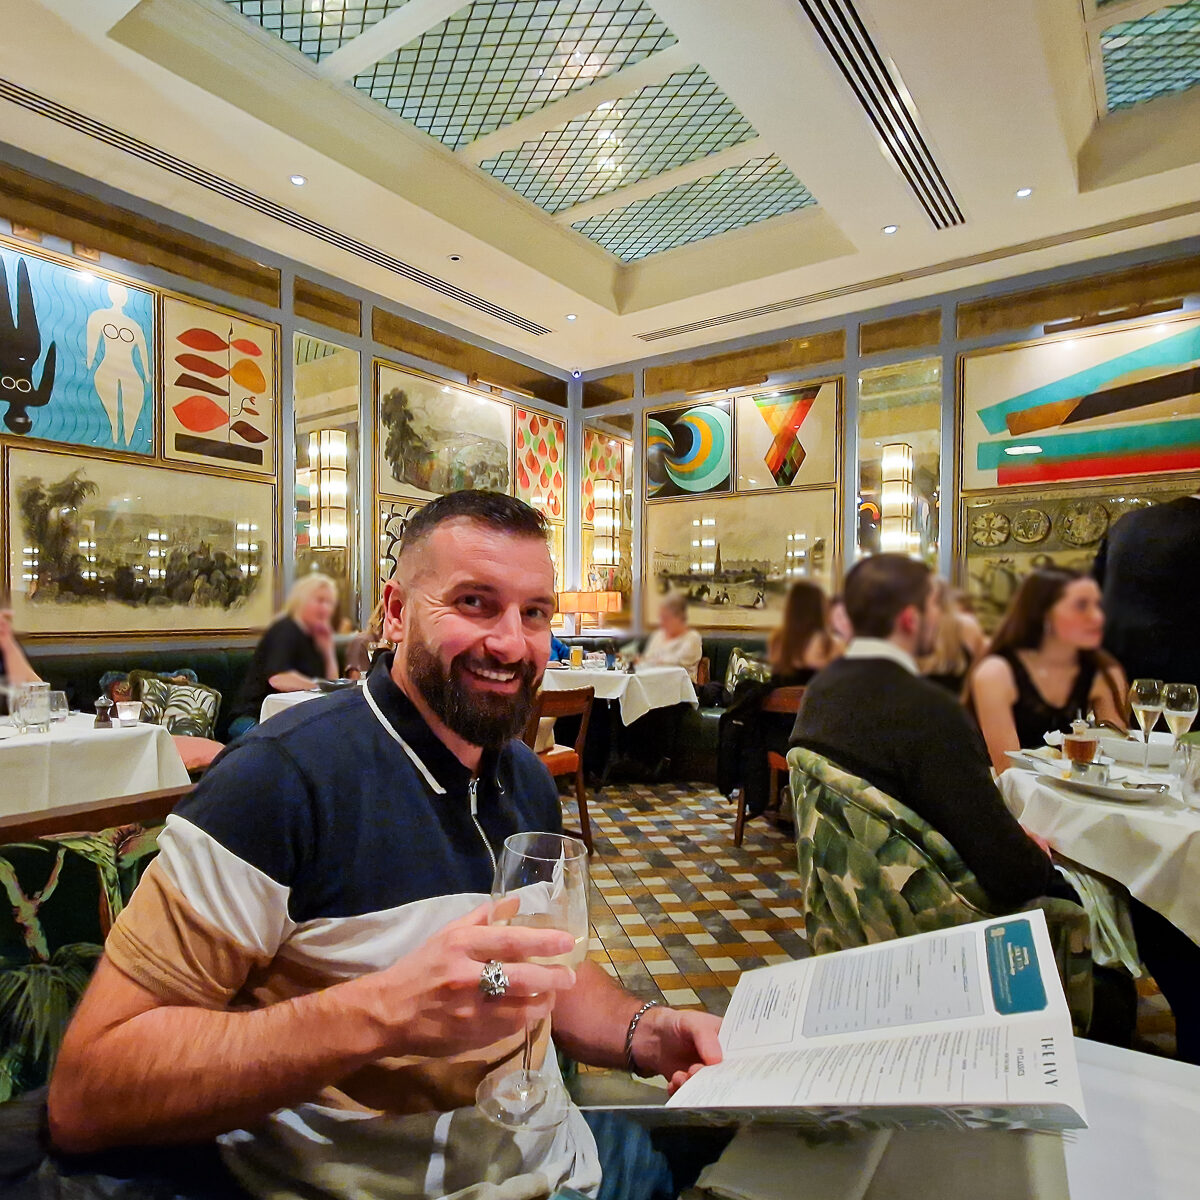 Luke from Flawless Journeys sitting in the main seating area holding a glass of wine and the menu at the Ivy brassiere in Bath